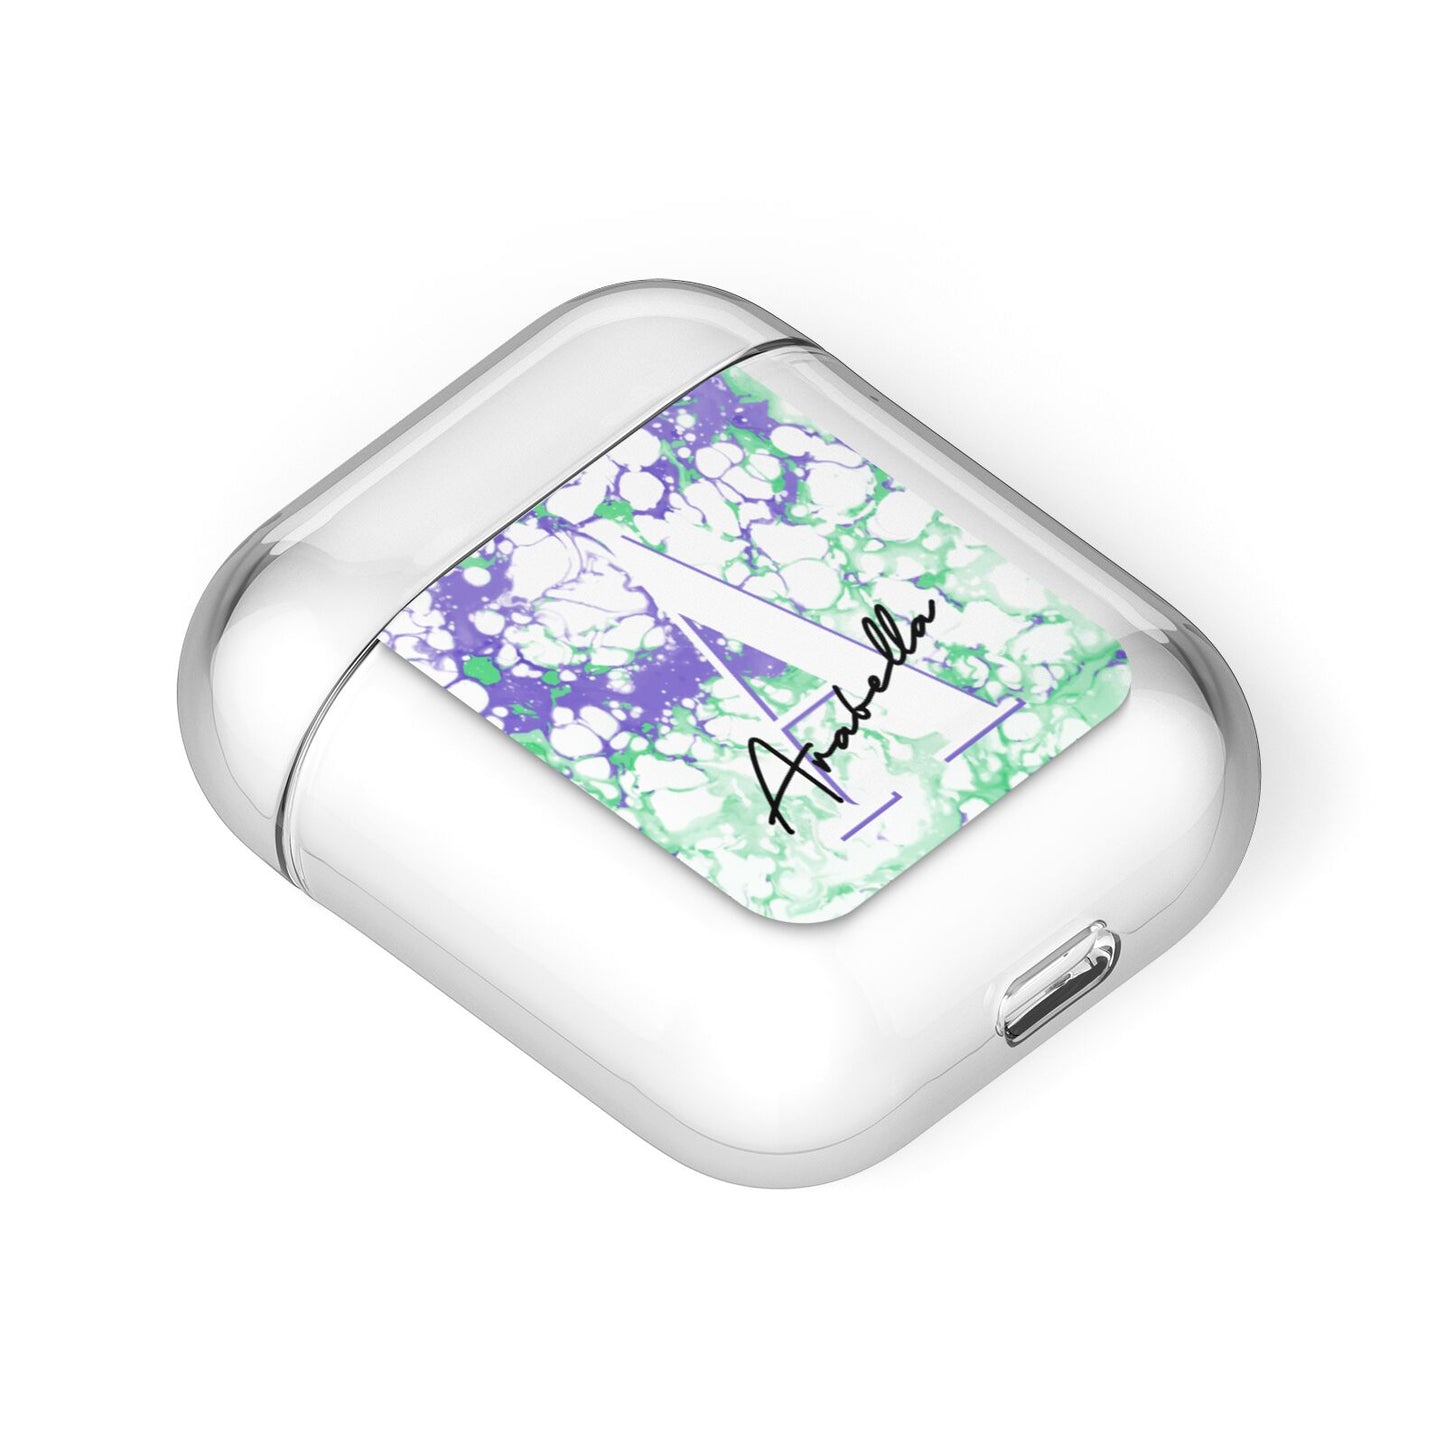 Personalised Liquid Marble AirPods Case Laid Flat